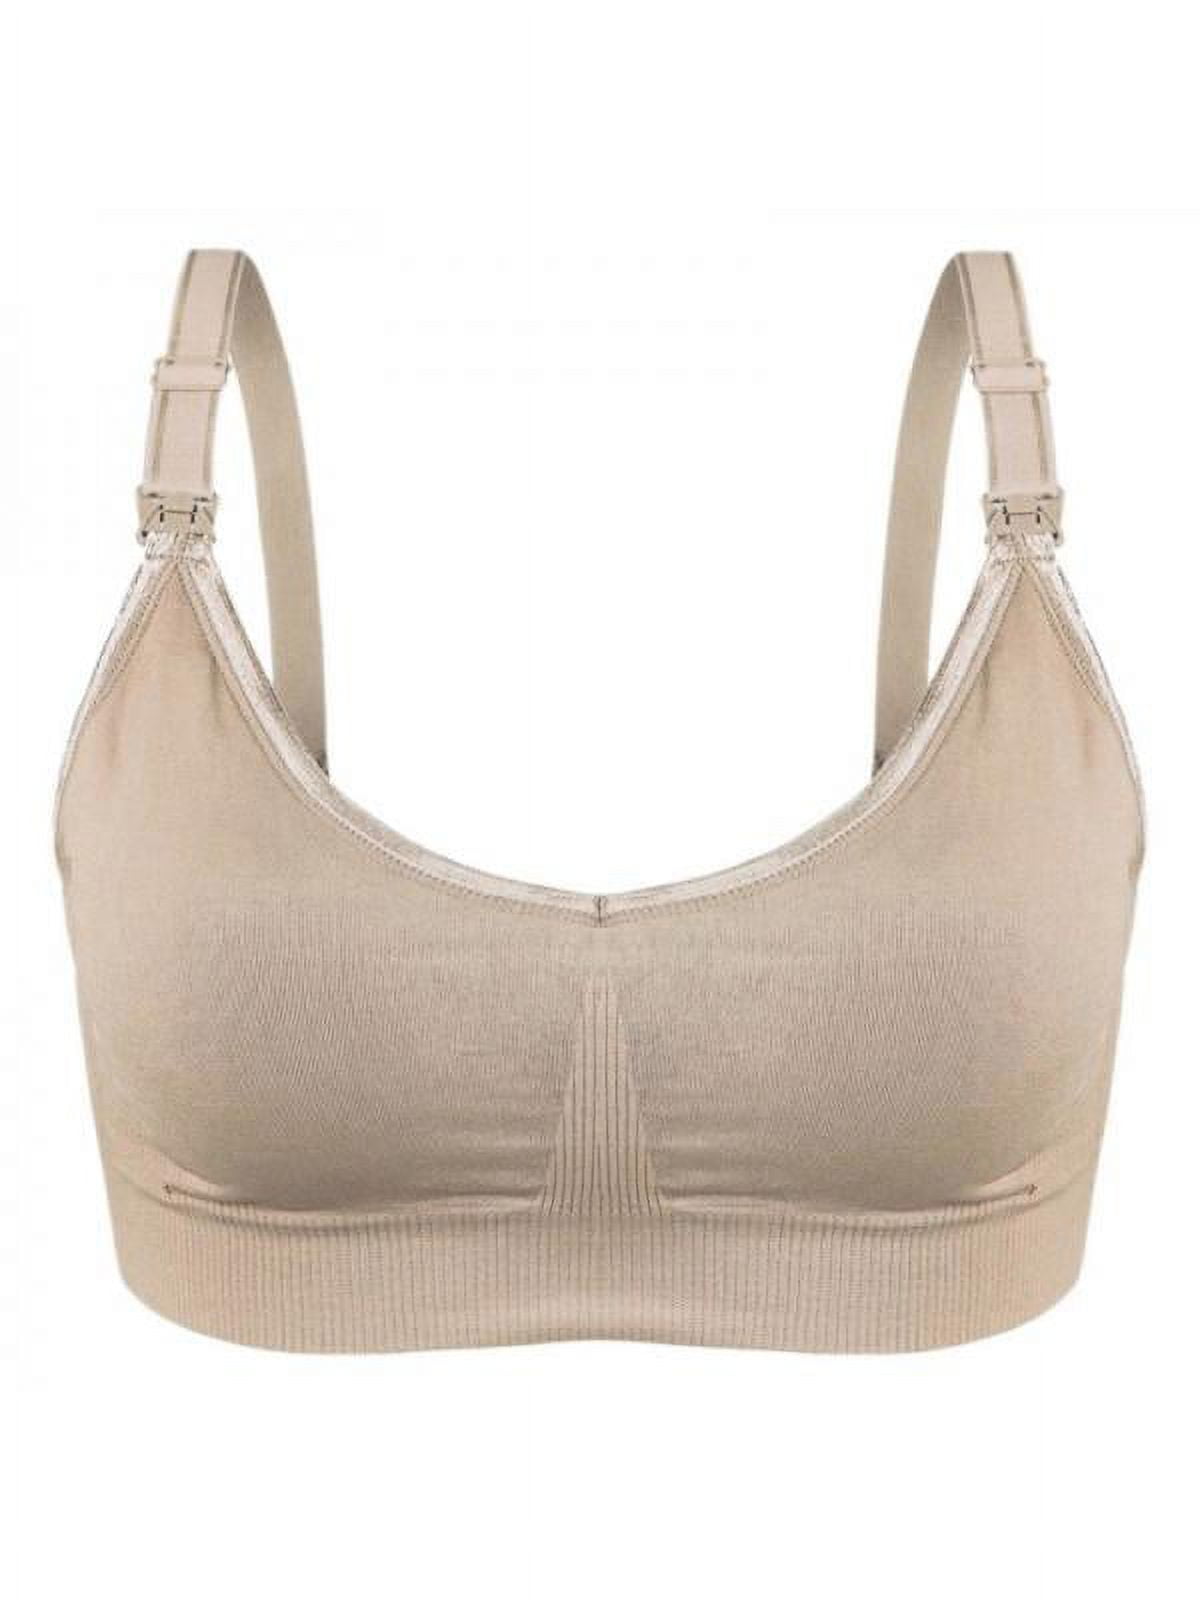 Can Sleeping in a Bra Help Prevent Sagging Breasts? 